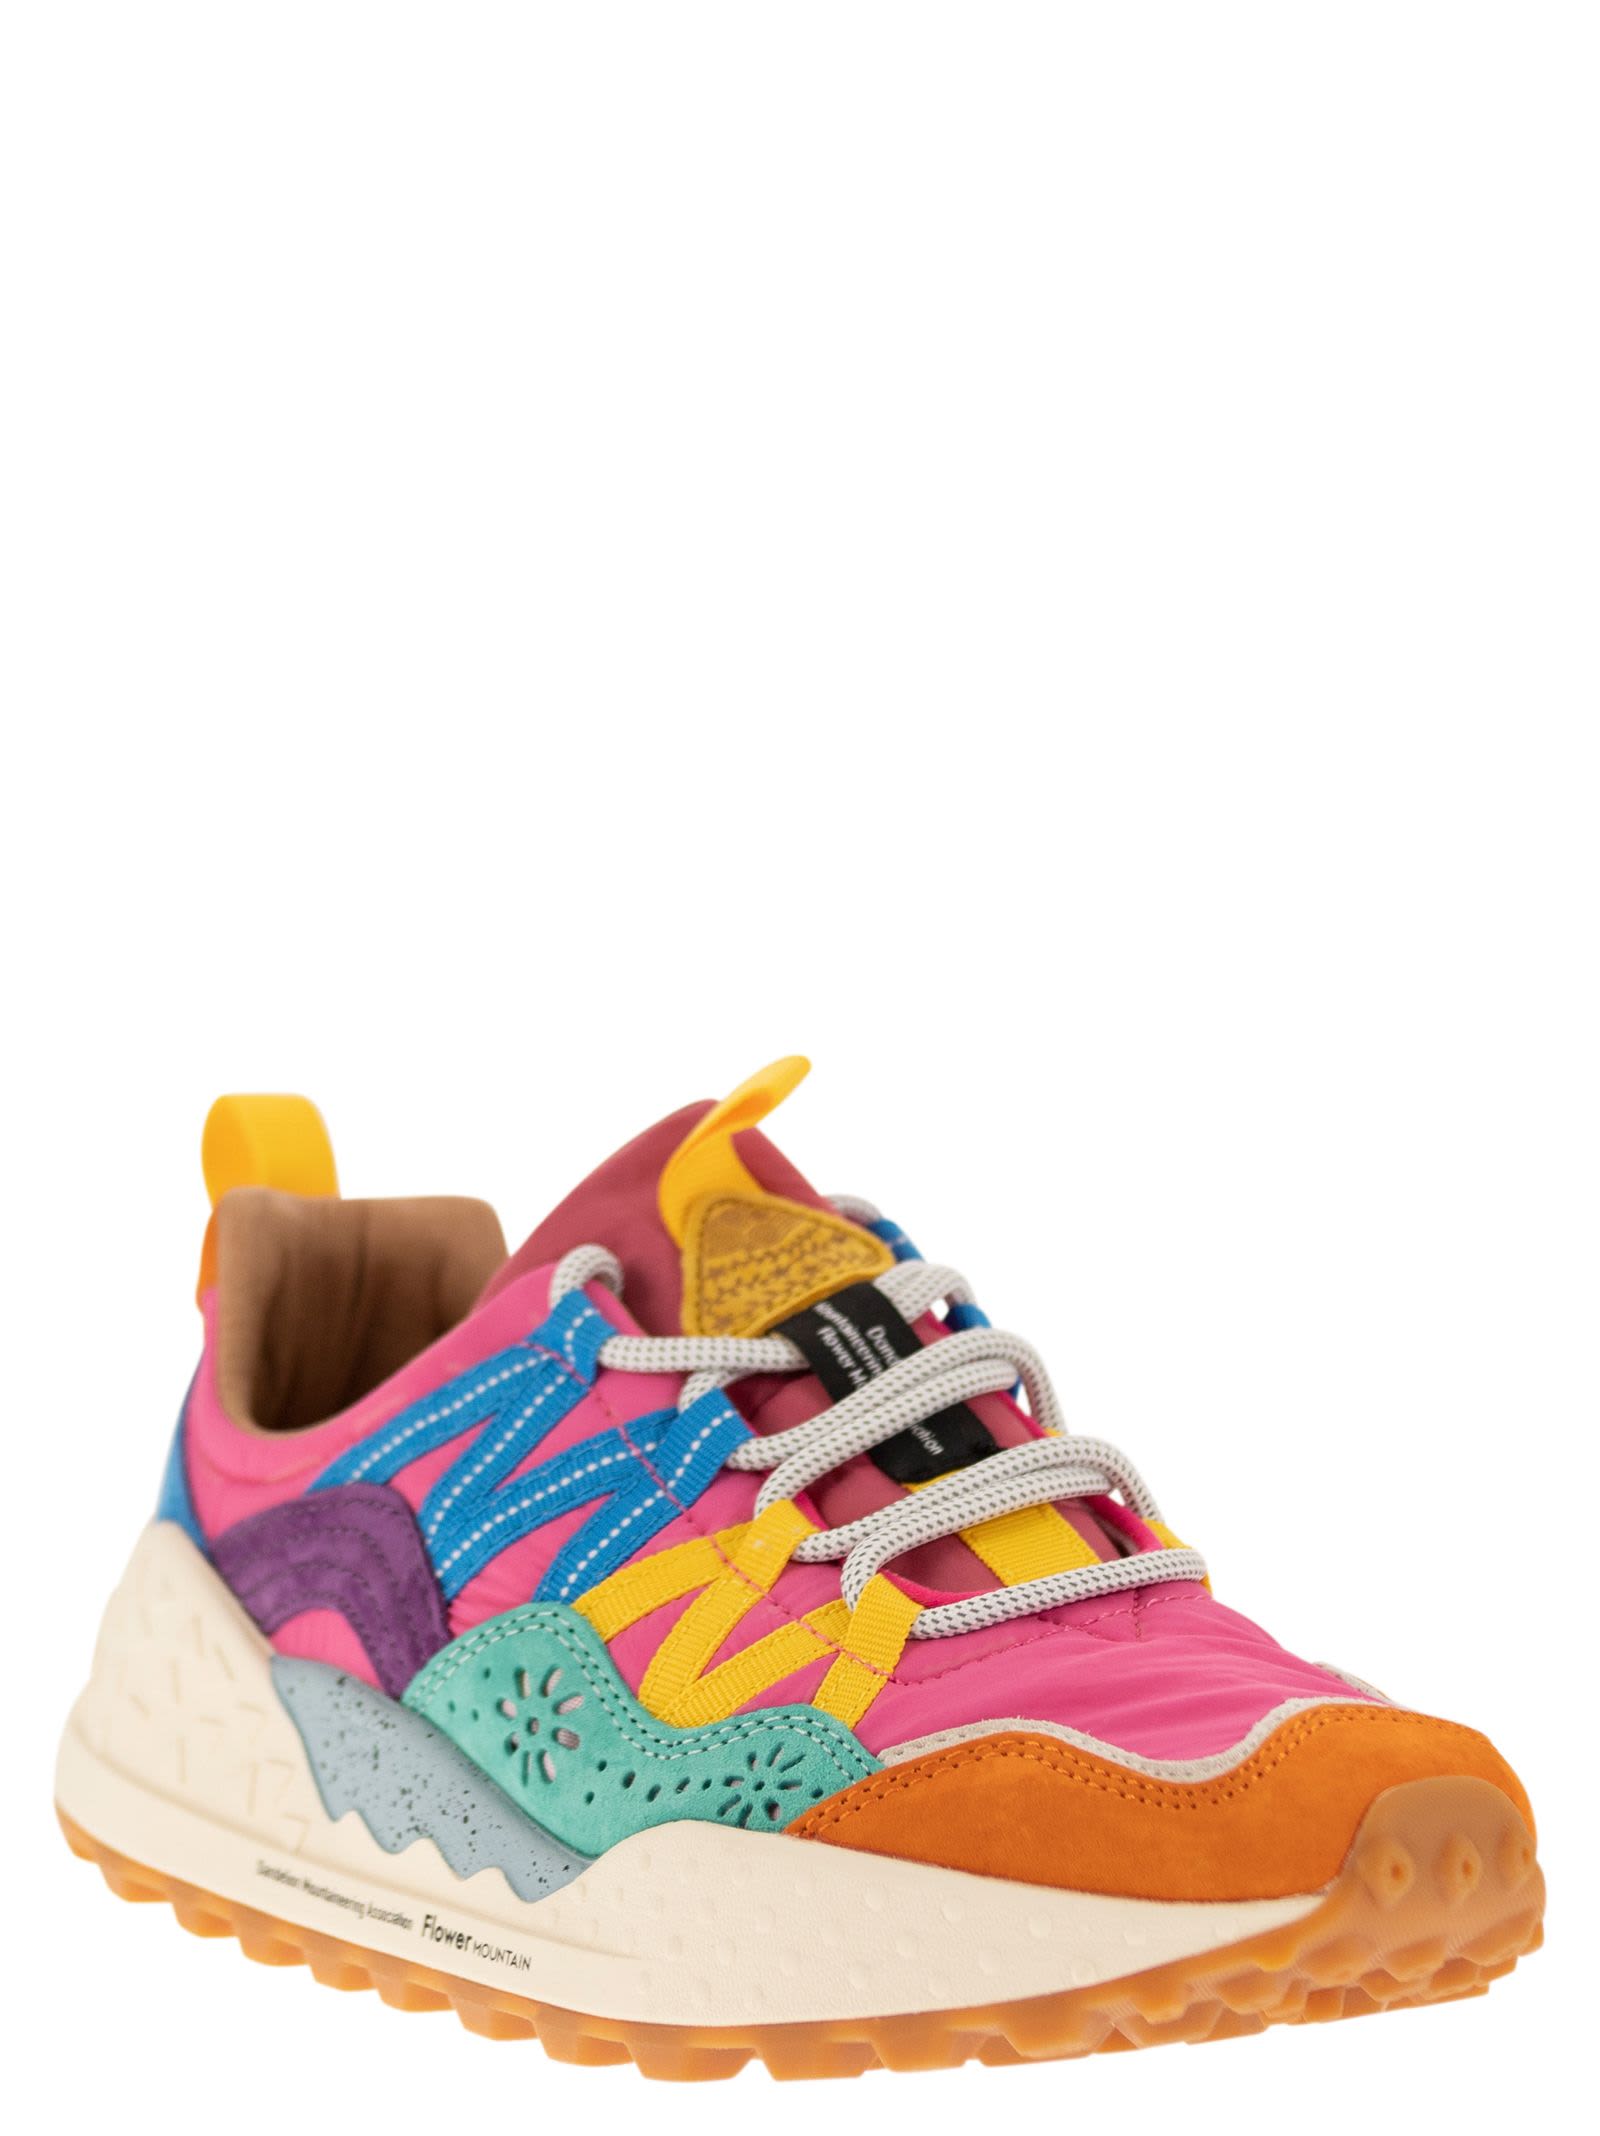 Shop Flower Mountain Washi - Sneakers In Suede And Technical Fabric In Orange